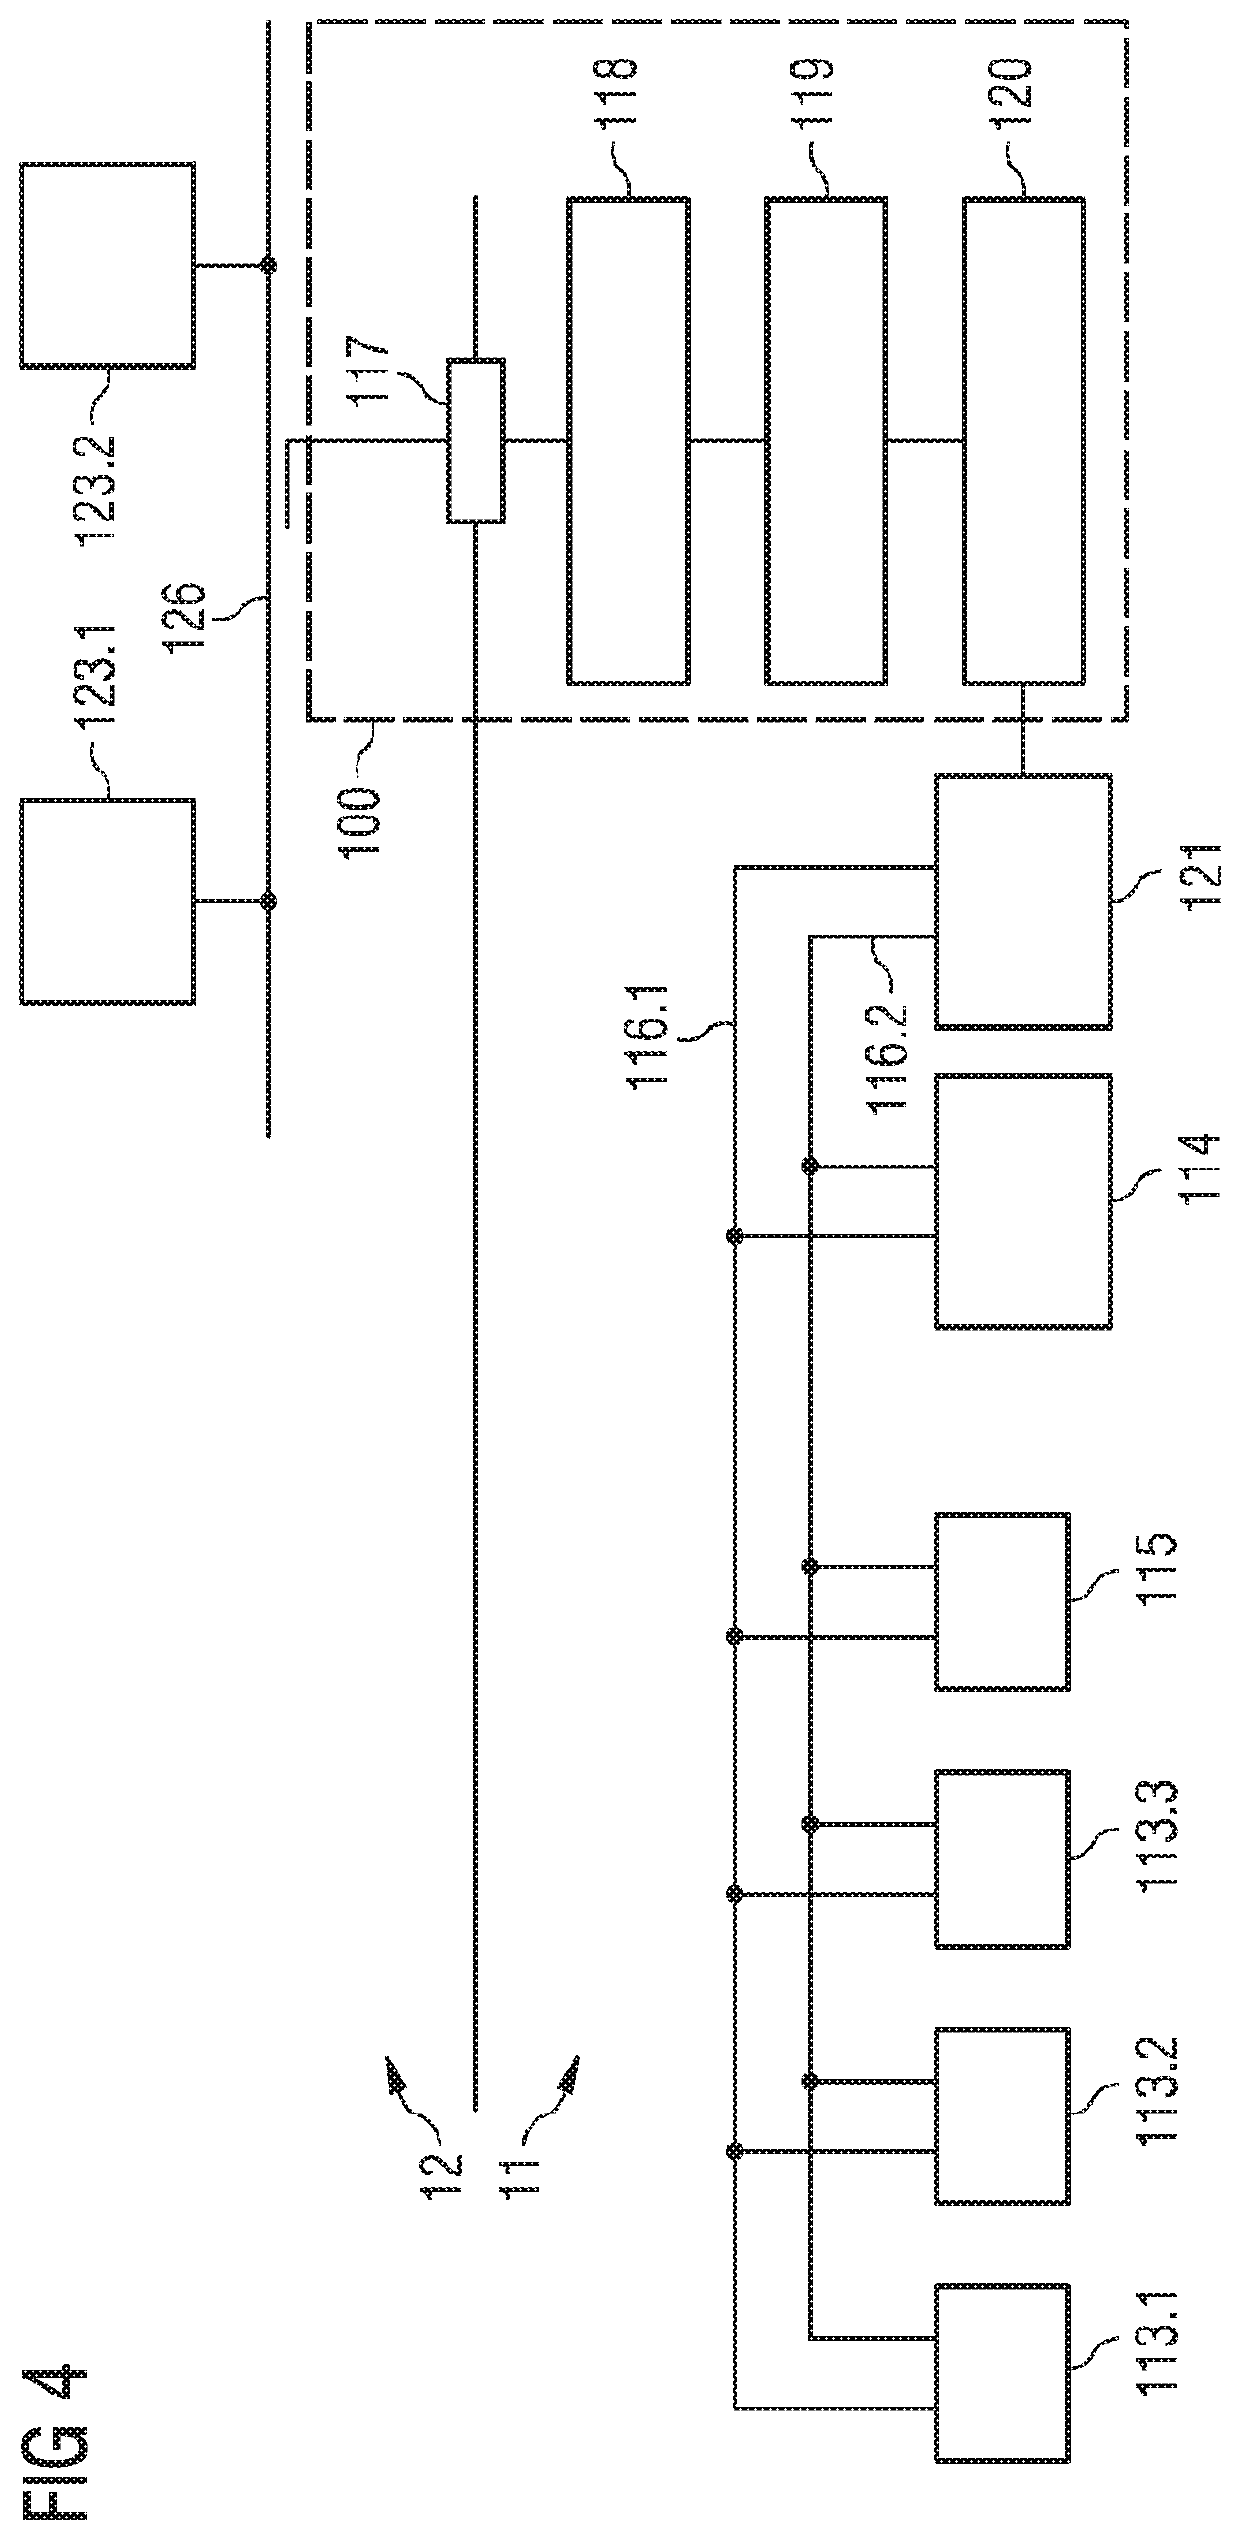 Method and arrangement for decoupled transmission of data between networks